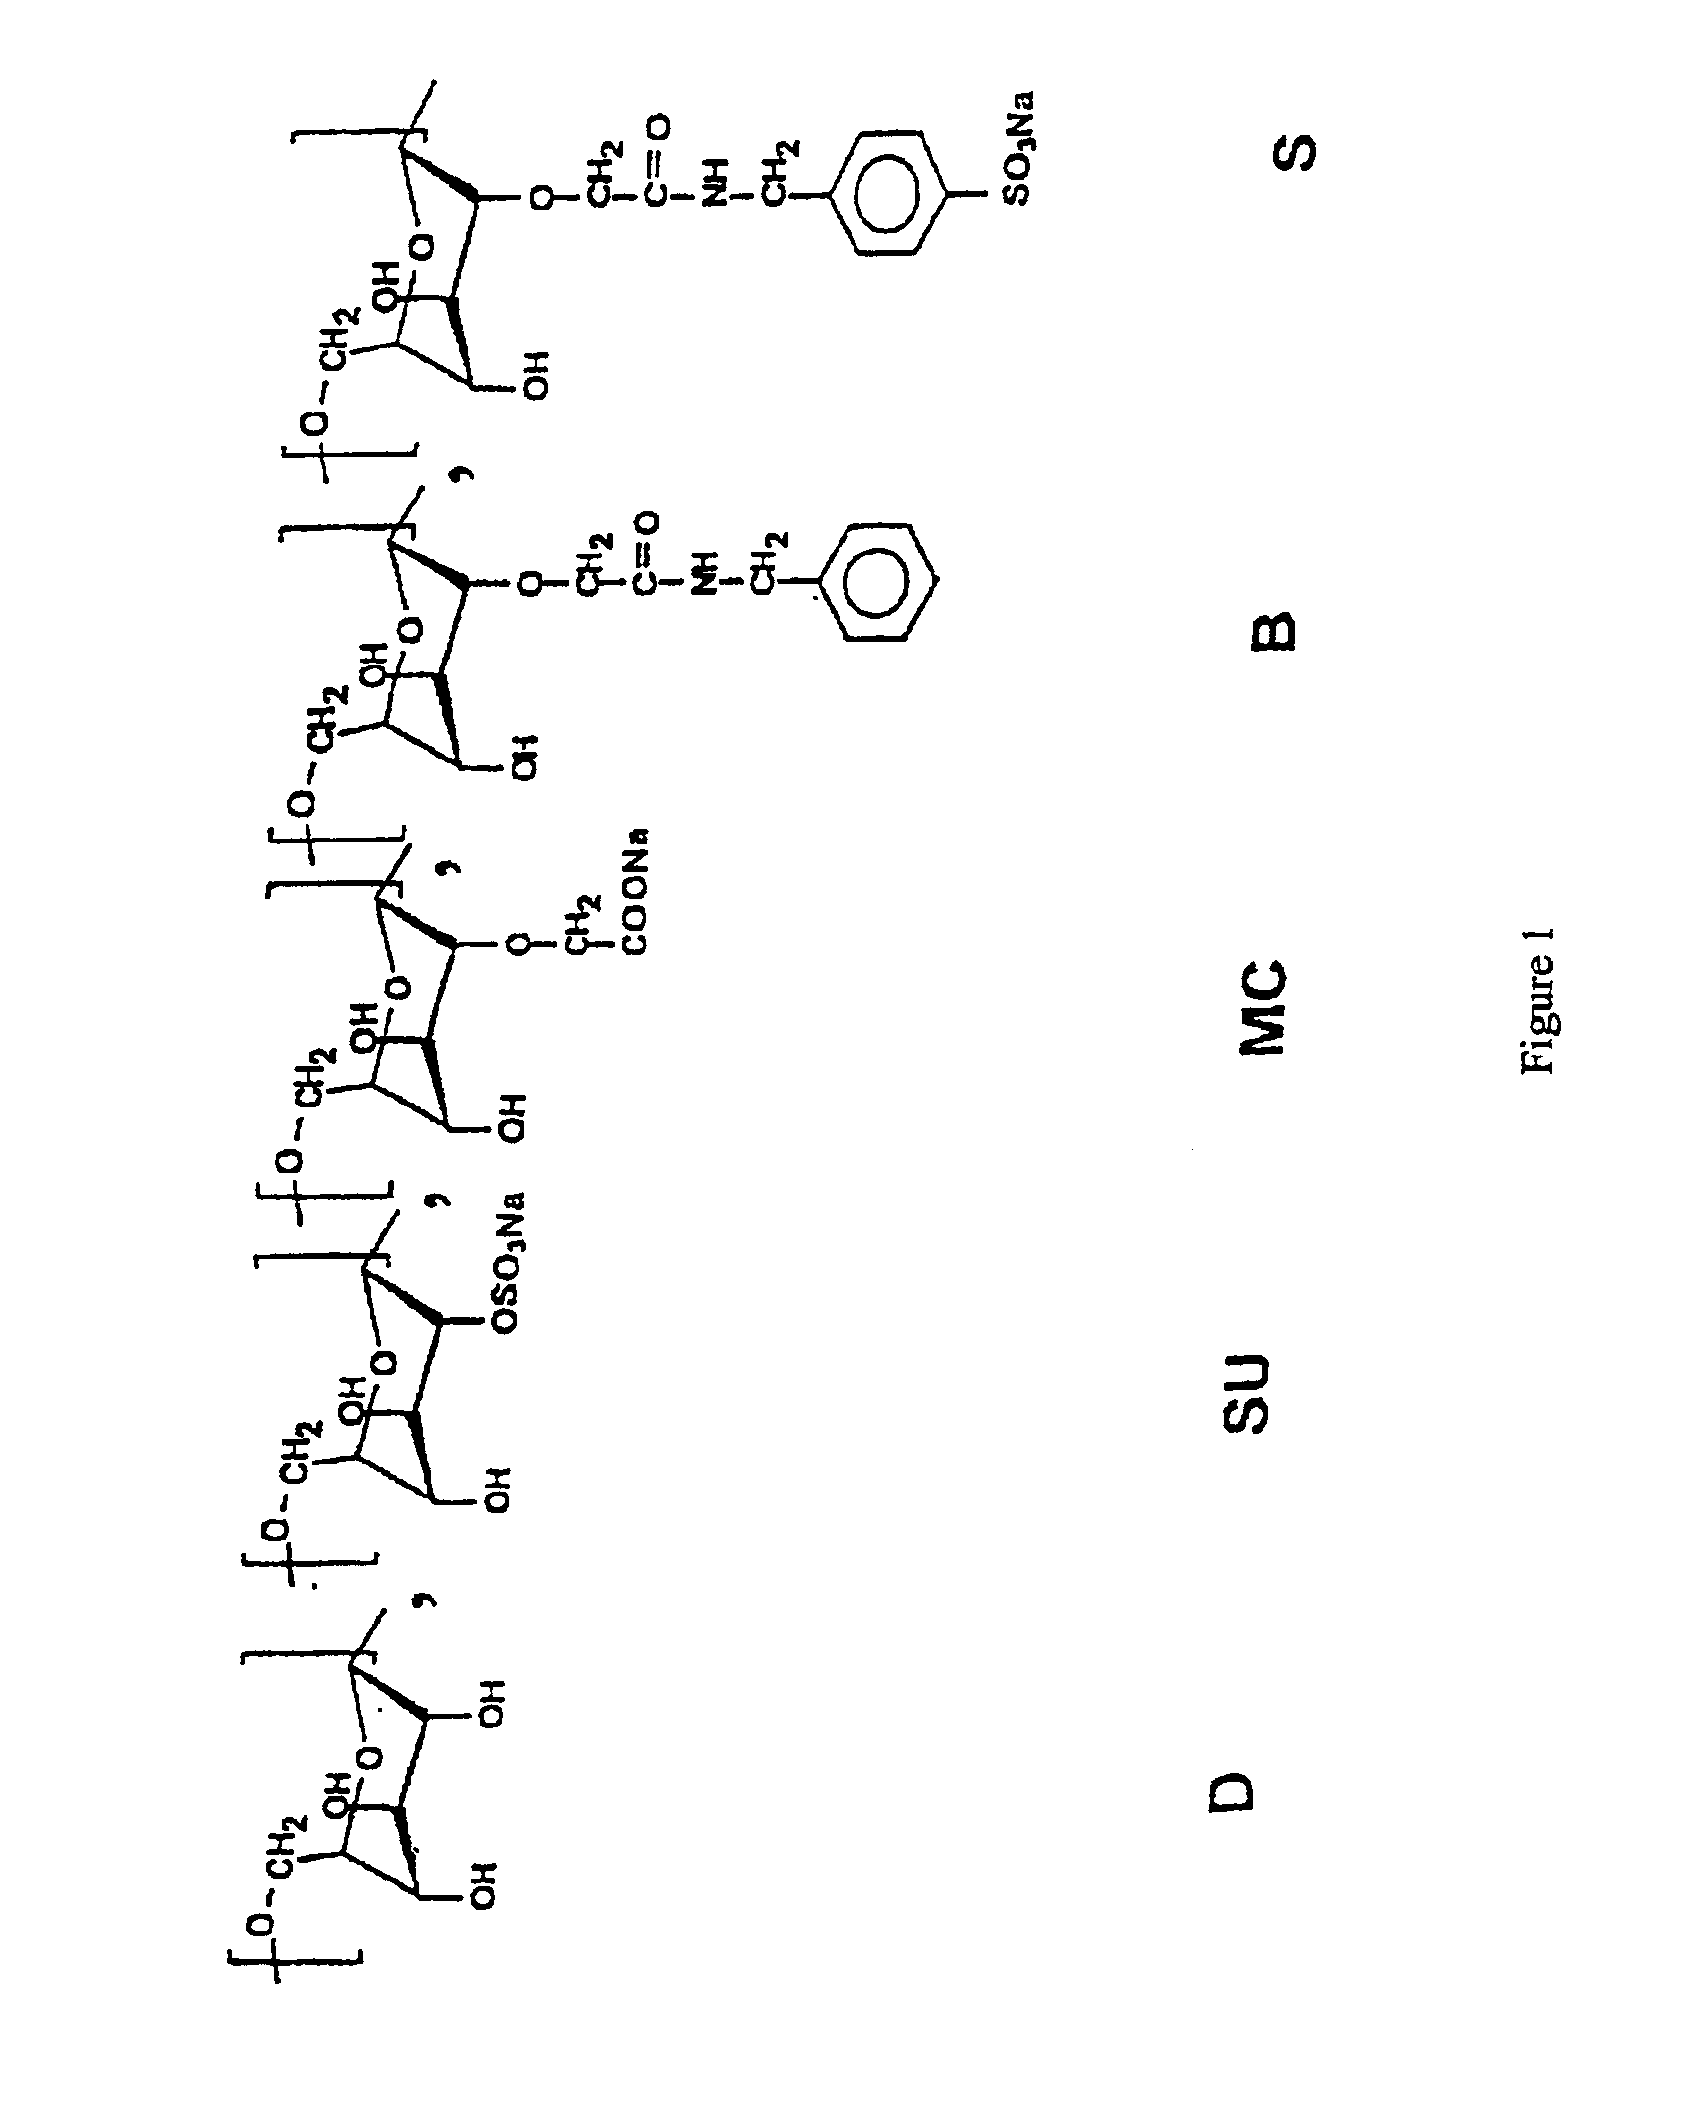 Biomaterial based on an insolubilized dextran derivative and a growth factor